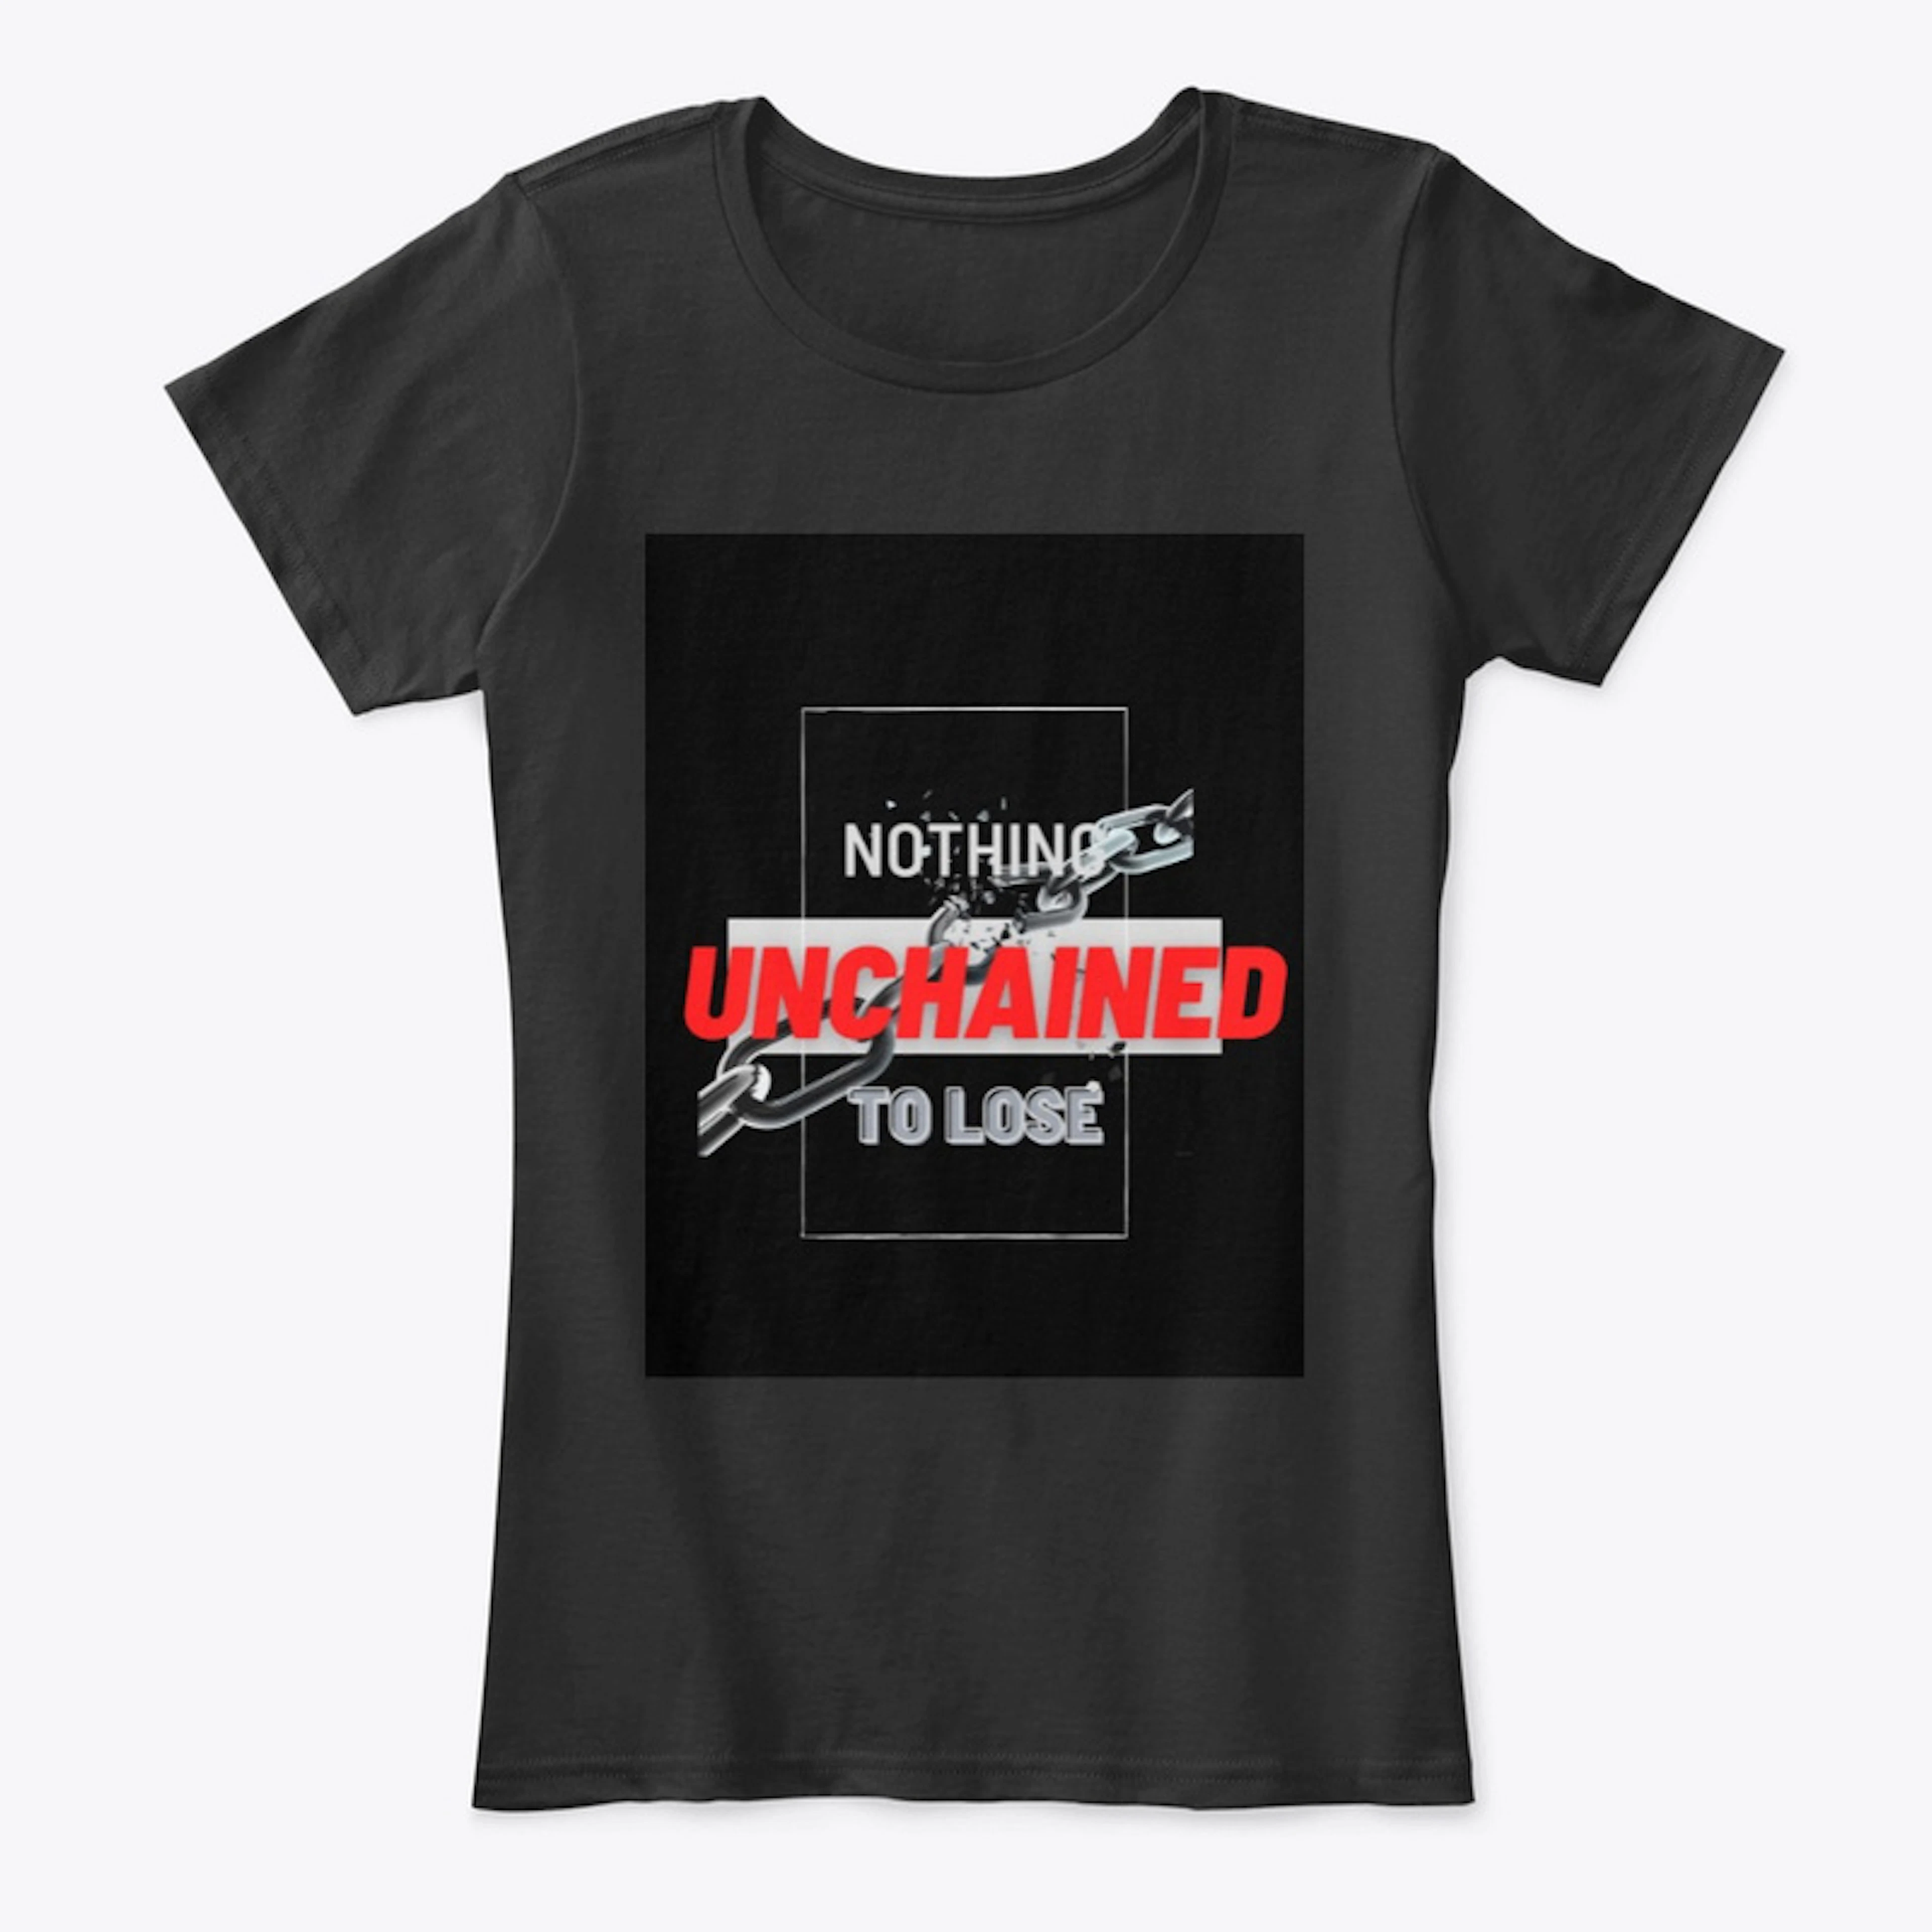 Nothing 2 Lose Unchained Black